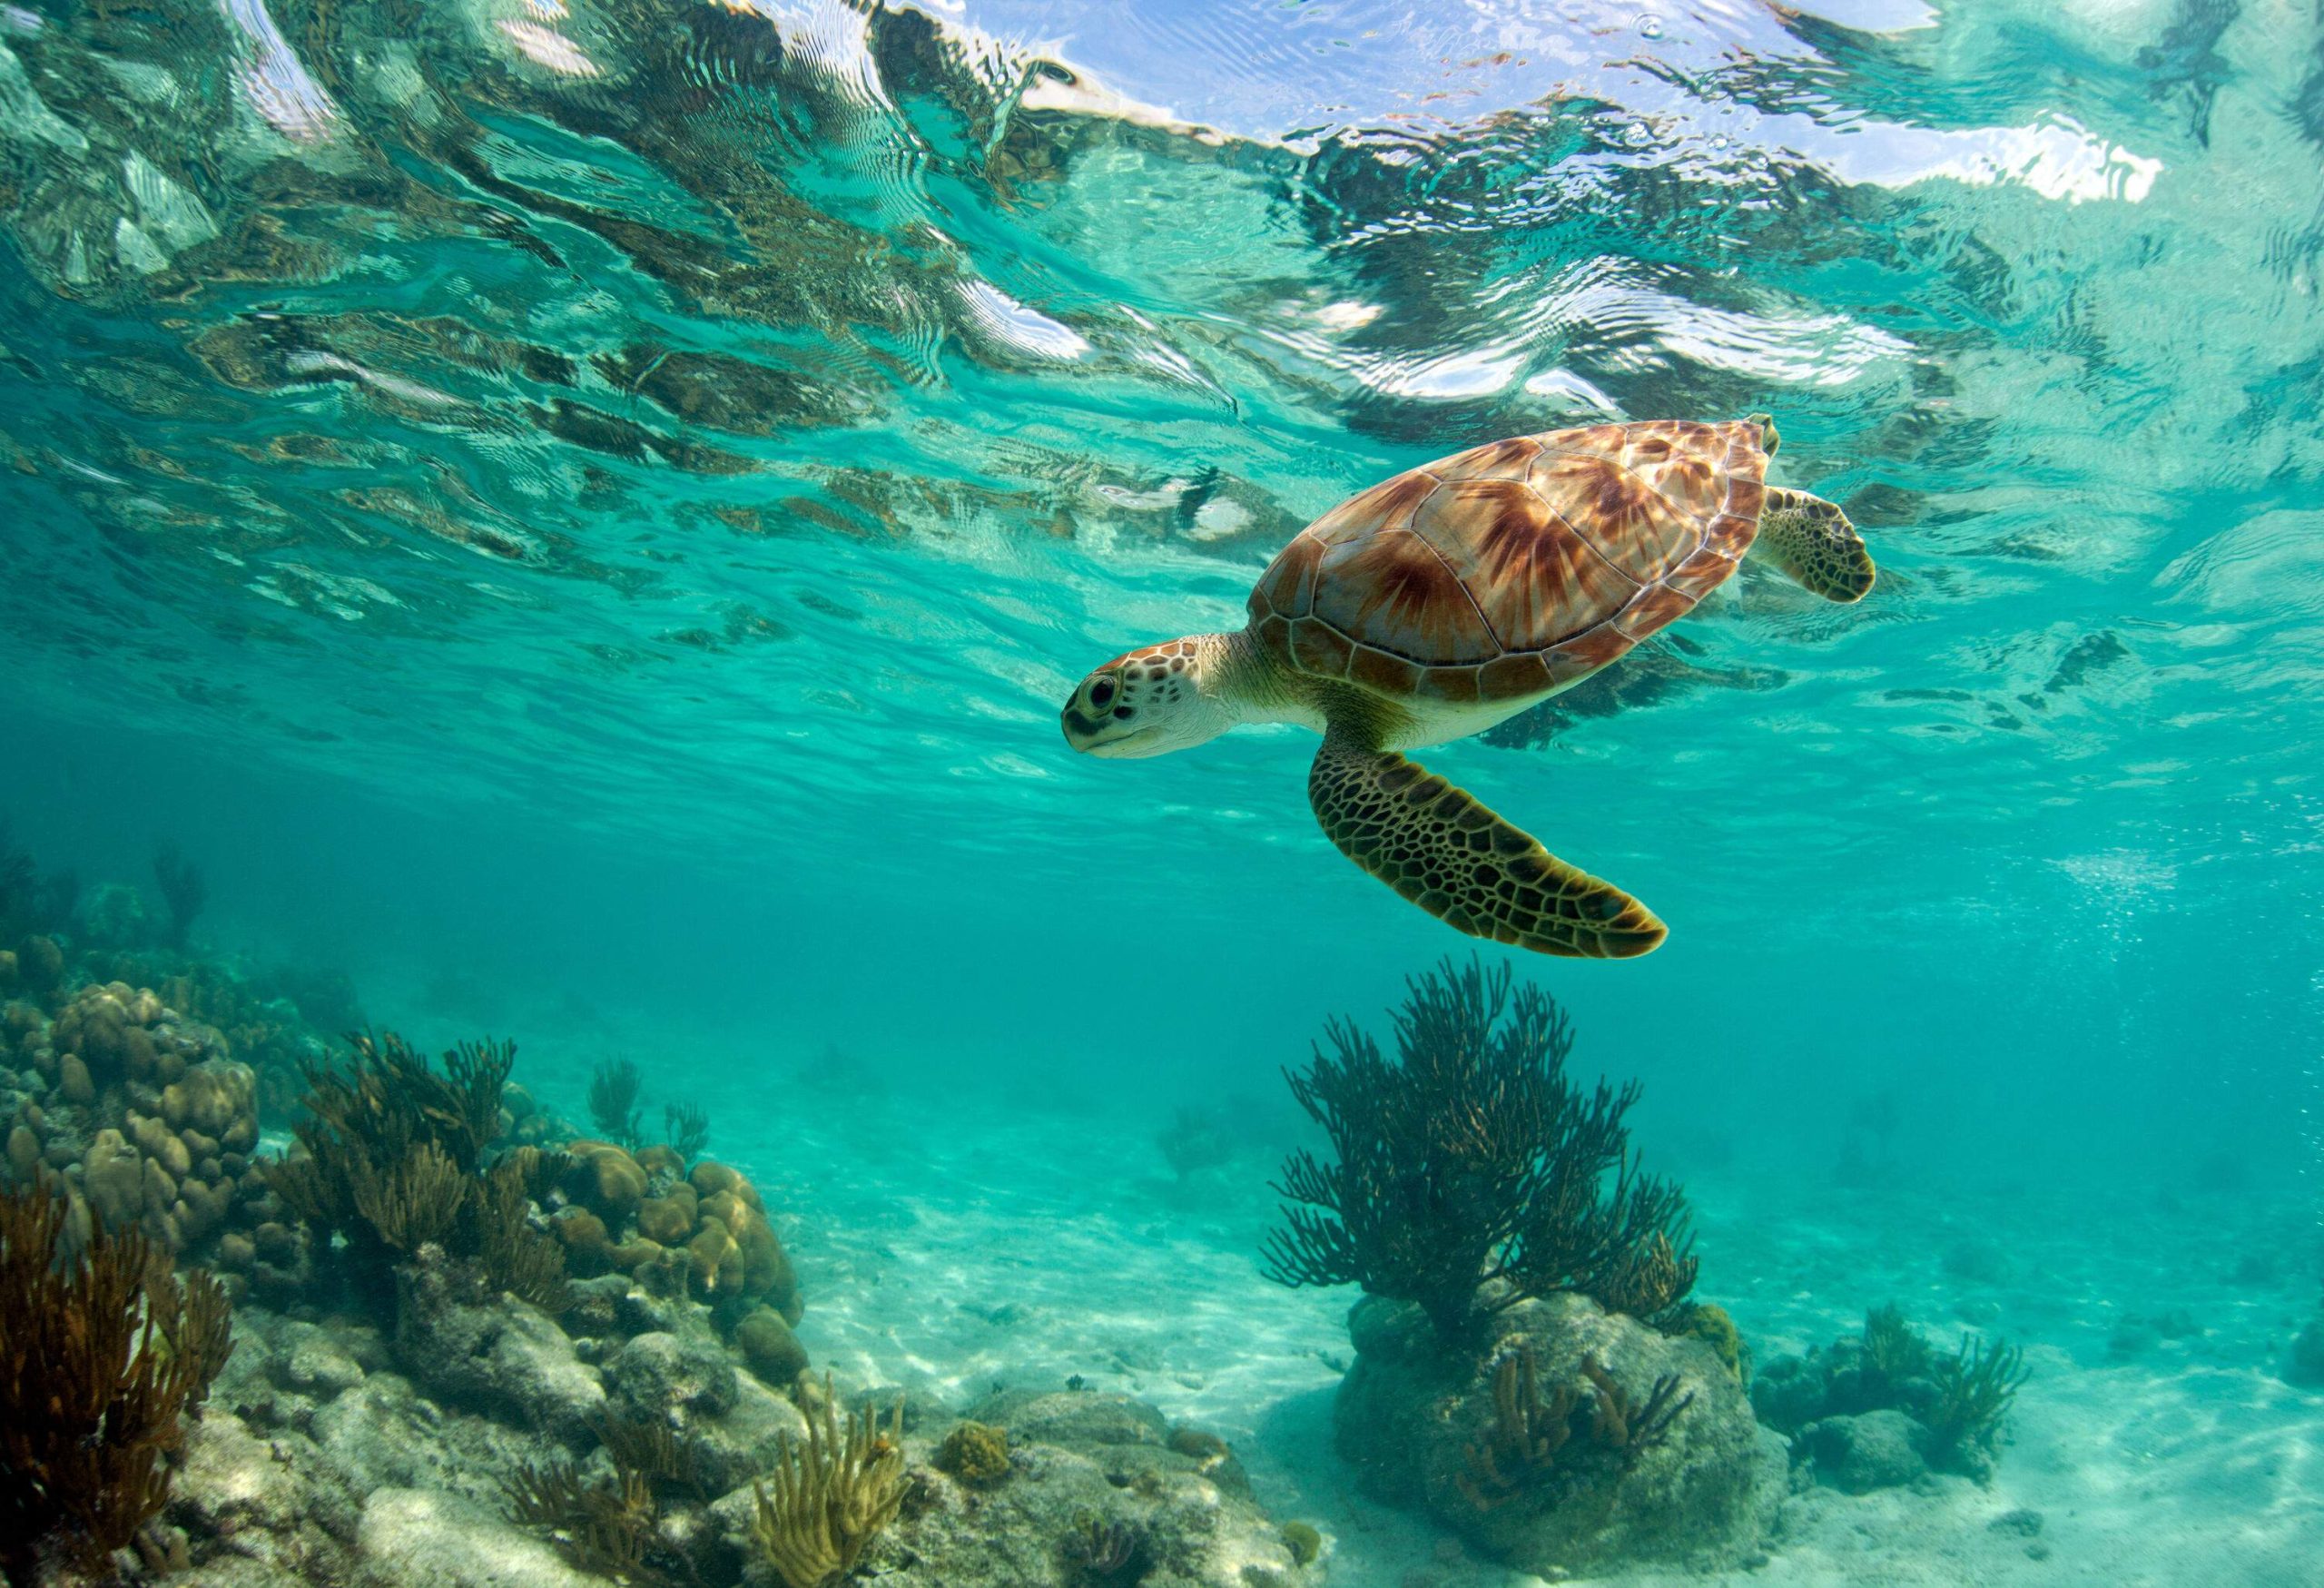 A sea turtle swimming under the deep crystalline waters.